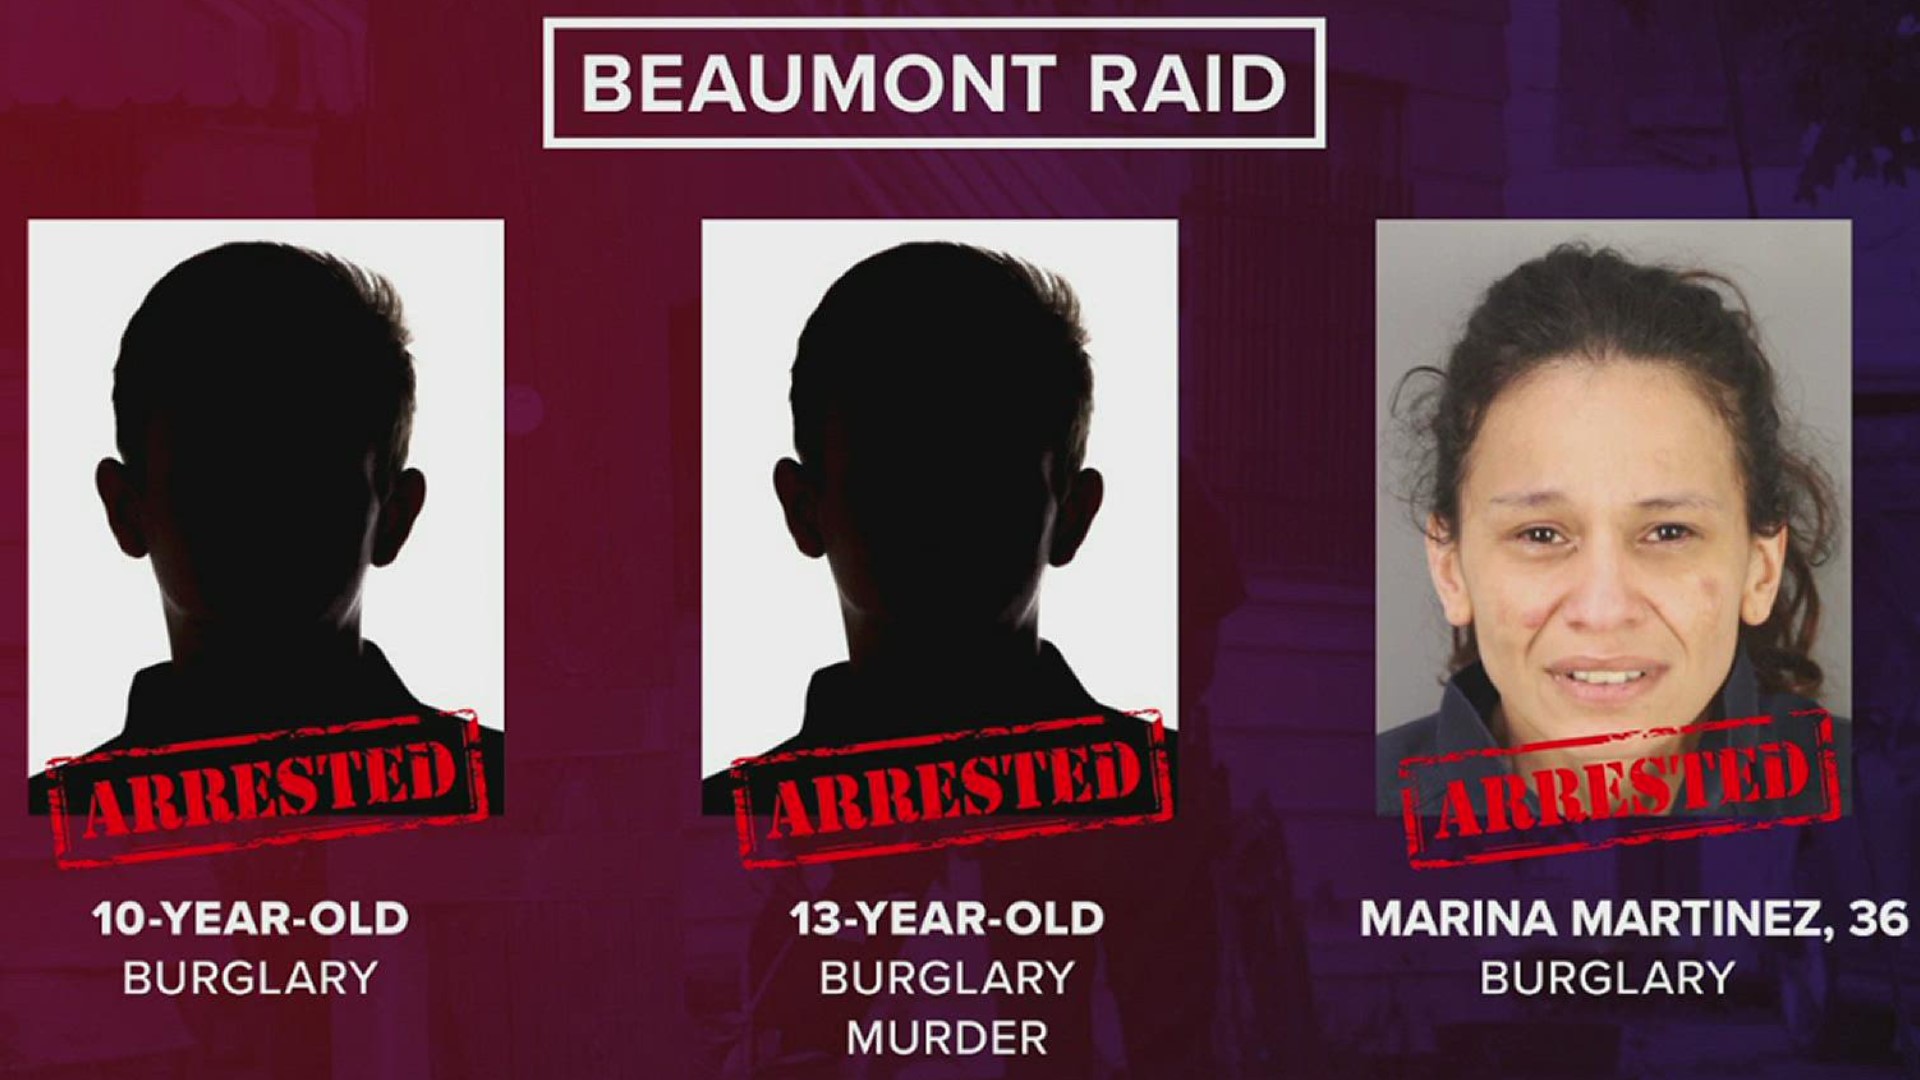 A 10-year-old boy was arrested for a muder and burglary warrant police say. A 13-year-old boy and a woman were also arrested on burglary charges.